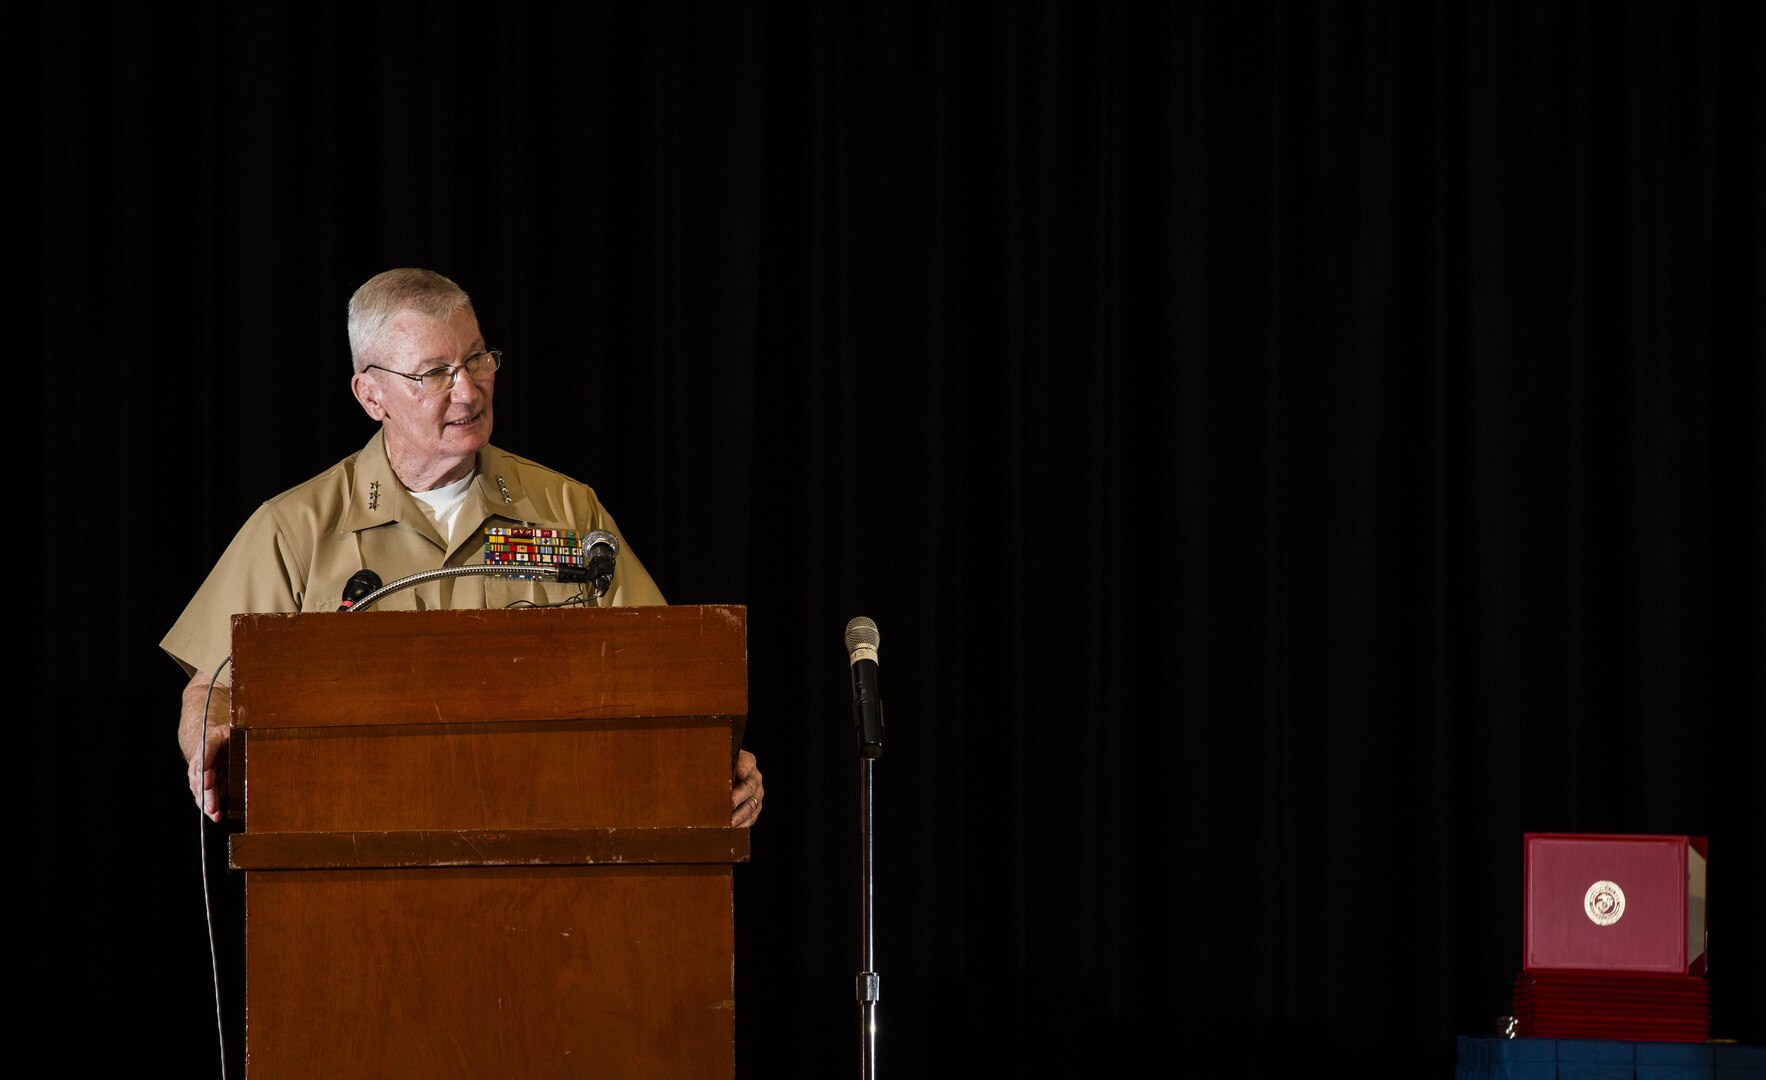 Lt. Gen. John A. Toolan, commander, U.S. Marine Corps Forces, Pacific, speaks during the First Responder Recognition Ceremony at the Neal S. Blaisdell Center, in Honolulu, Dec. 18, 2015.  U.S. Marine Corps Forces, Pacific recognized Honolulu's first responders who assisted during the rescue and treatment of Marines and sailors in the aftermath of the 15th Marine Expeditionary Unit MV-22 Osprey tilt-rotor aircraft mishap.